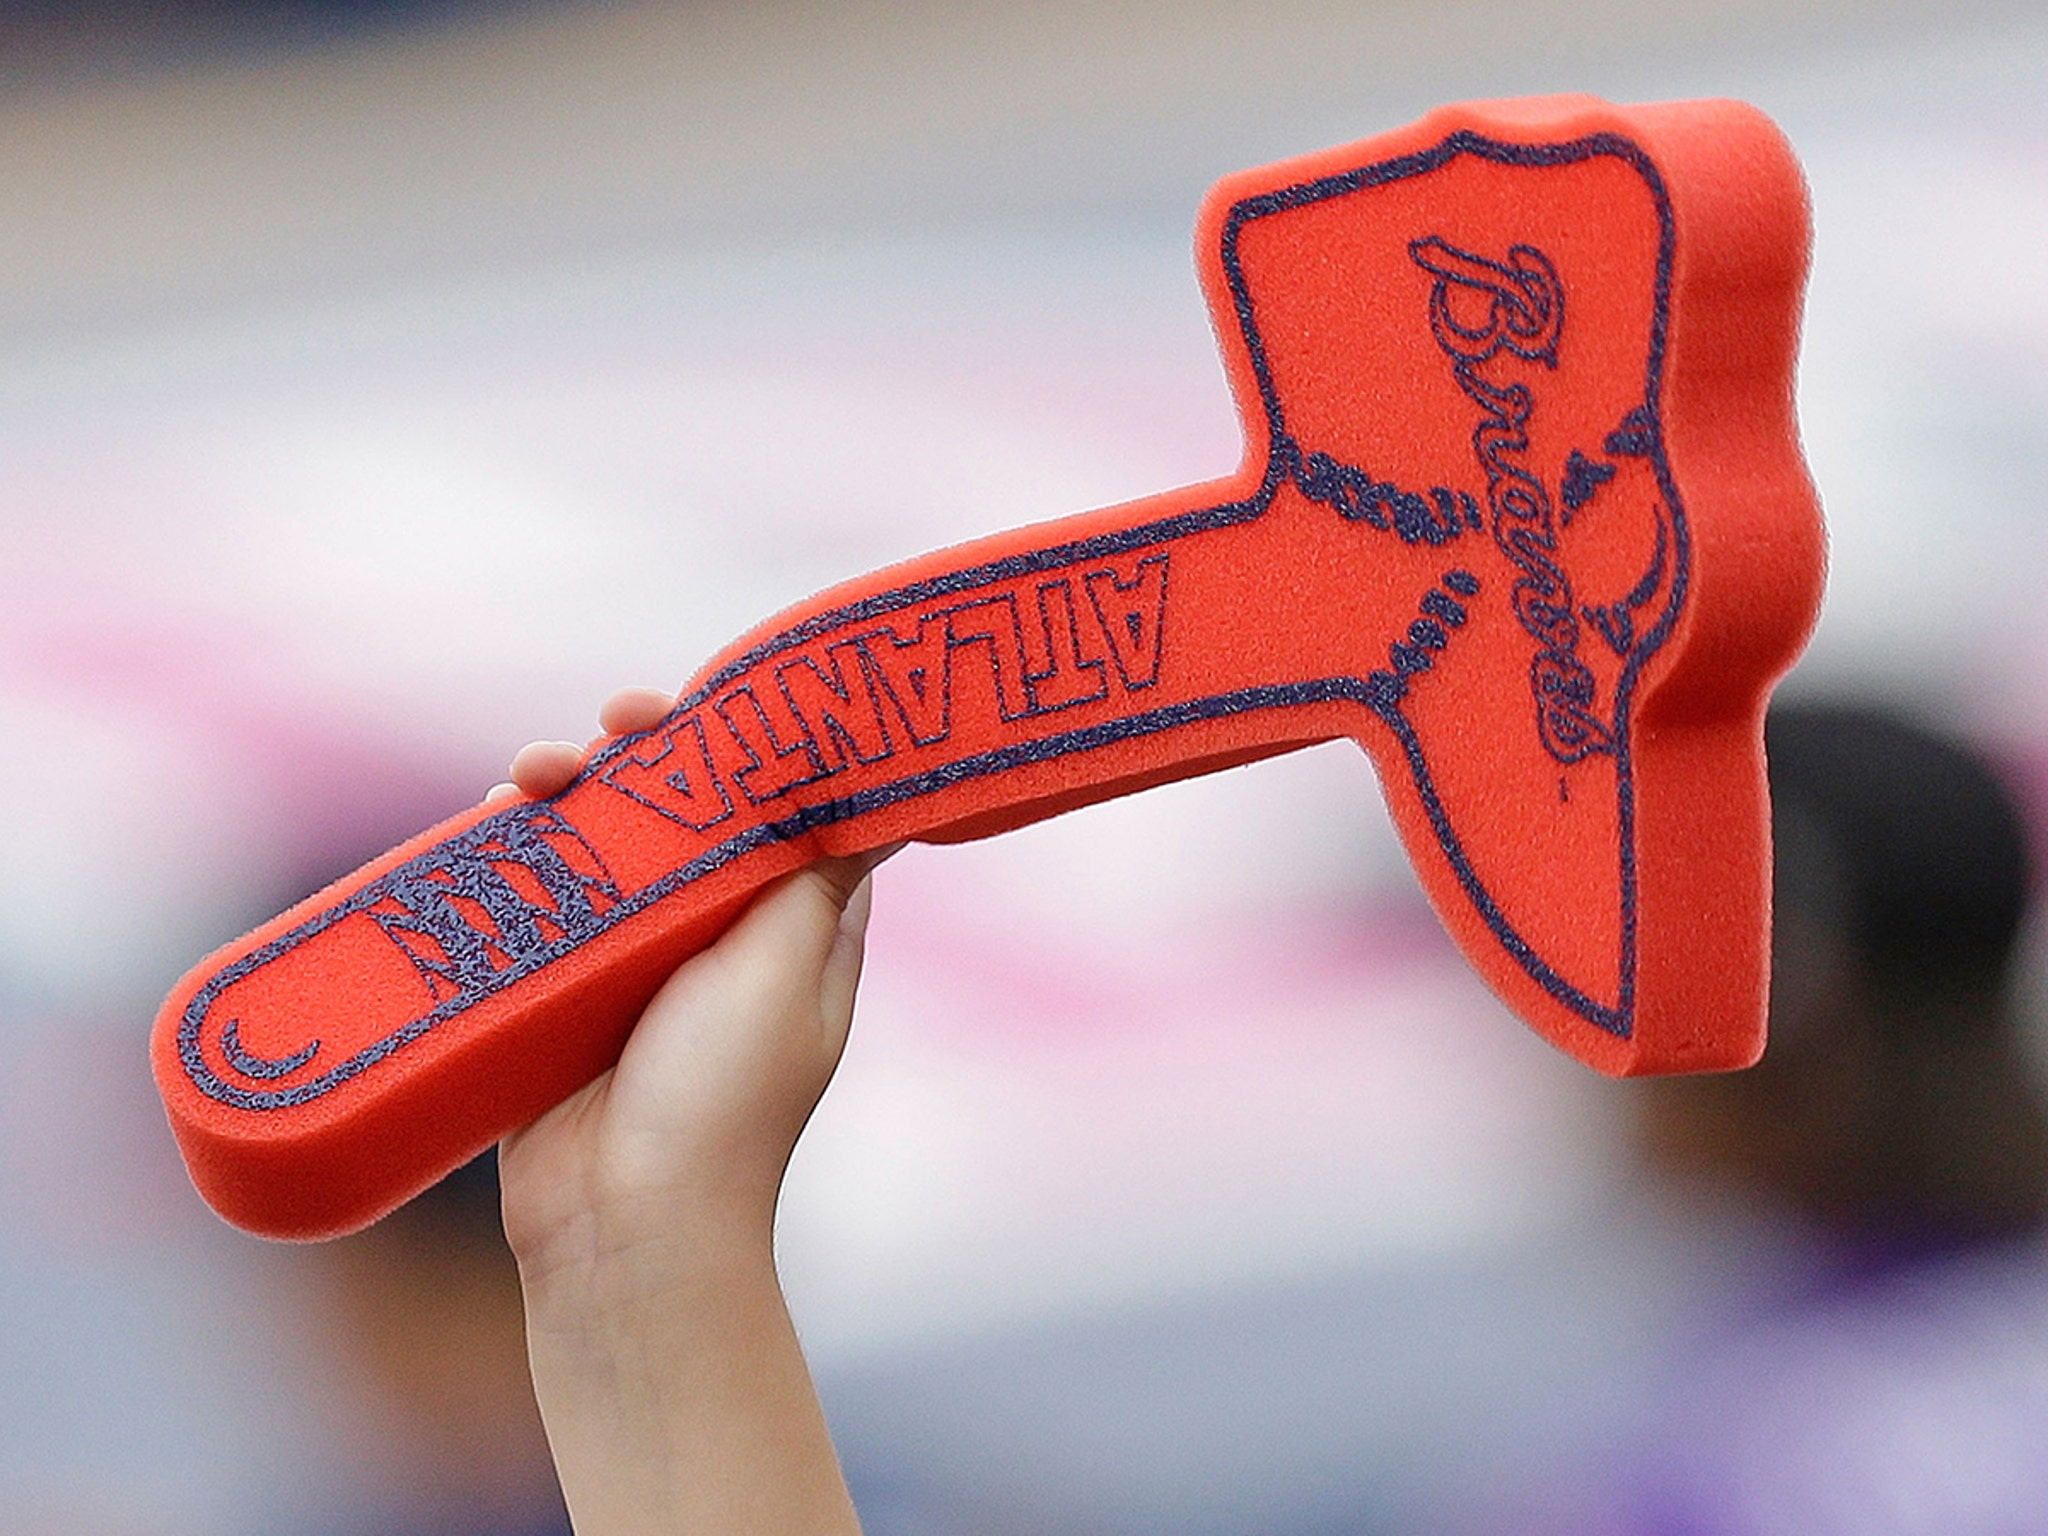 Braves End Foam-Tomahawk Handout After Native American Pitcher's